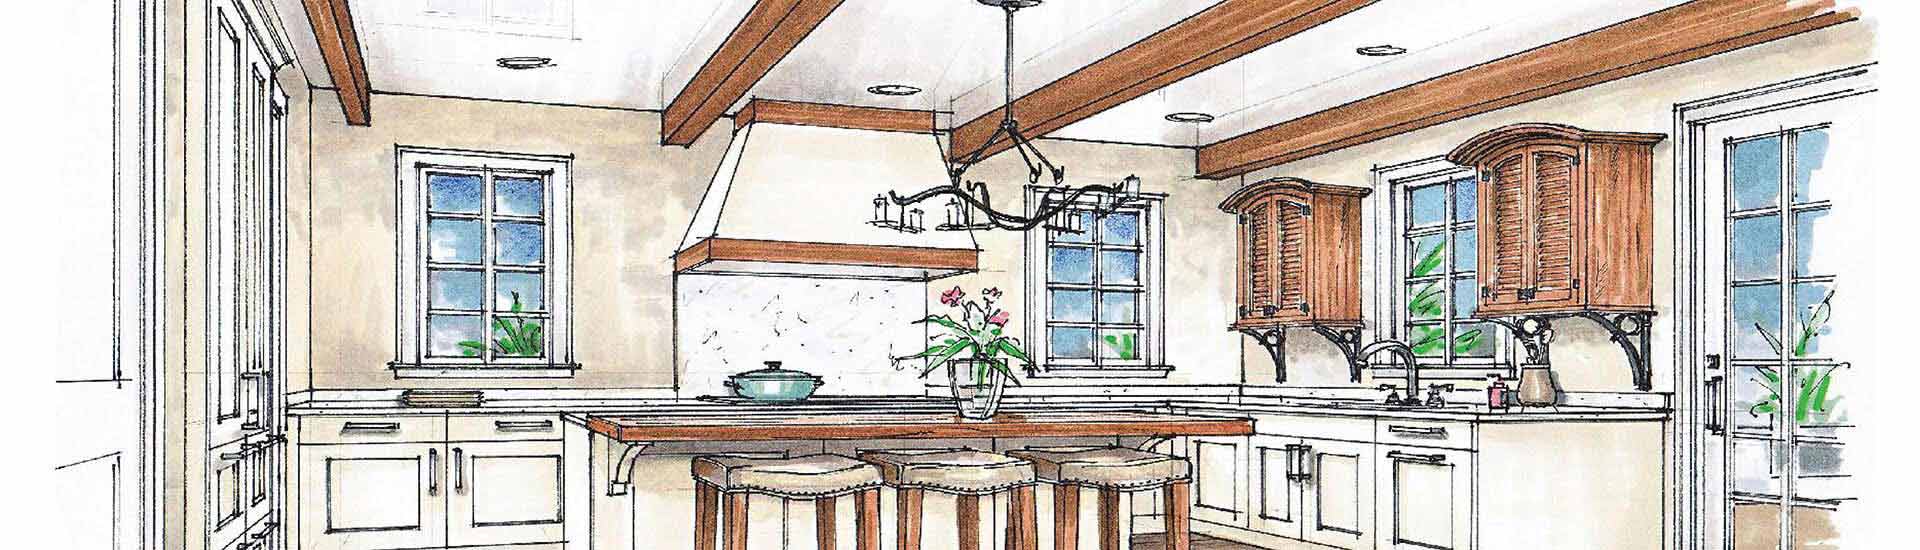 Essential Details You Should Look For in Millwork Drawings